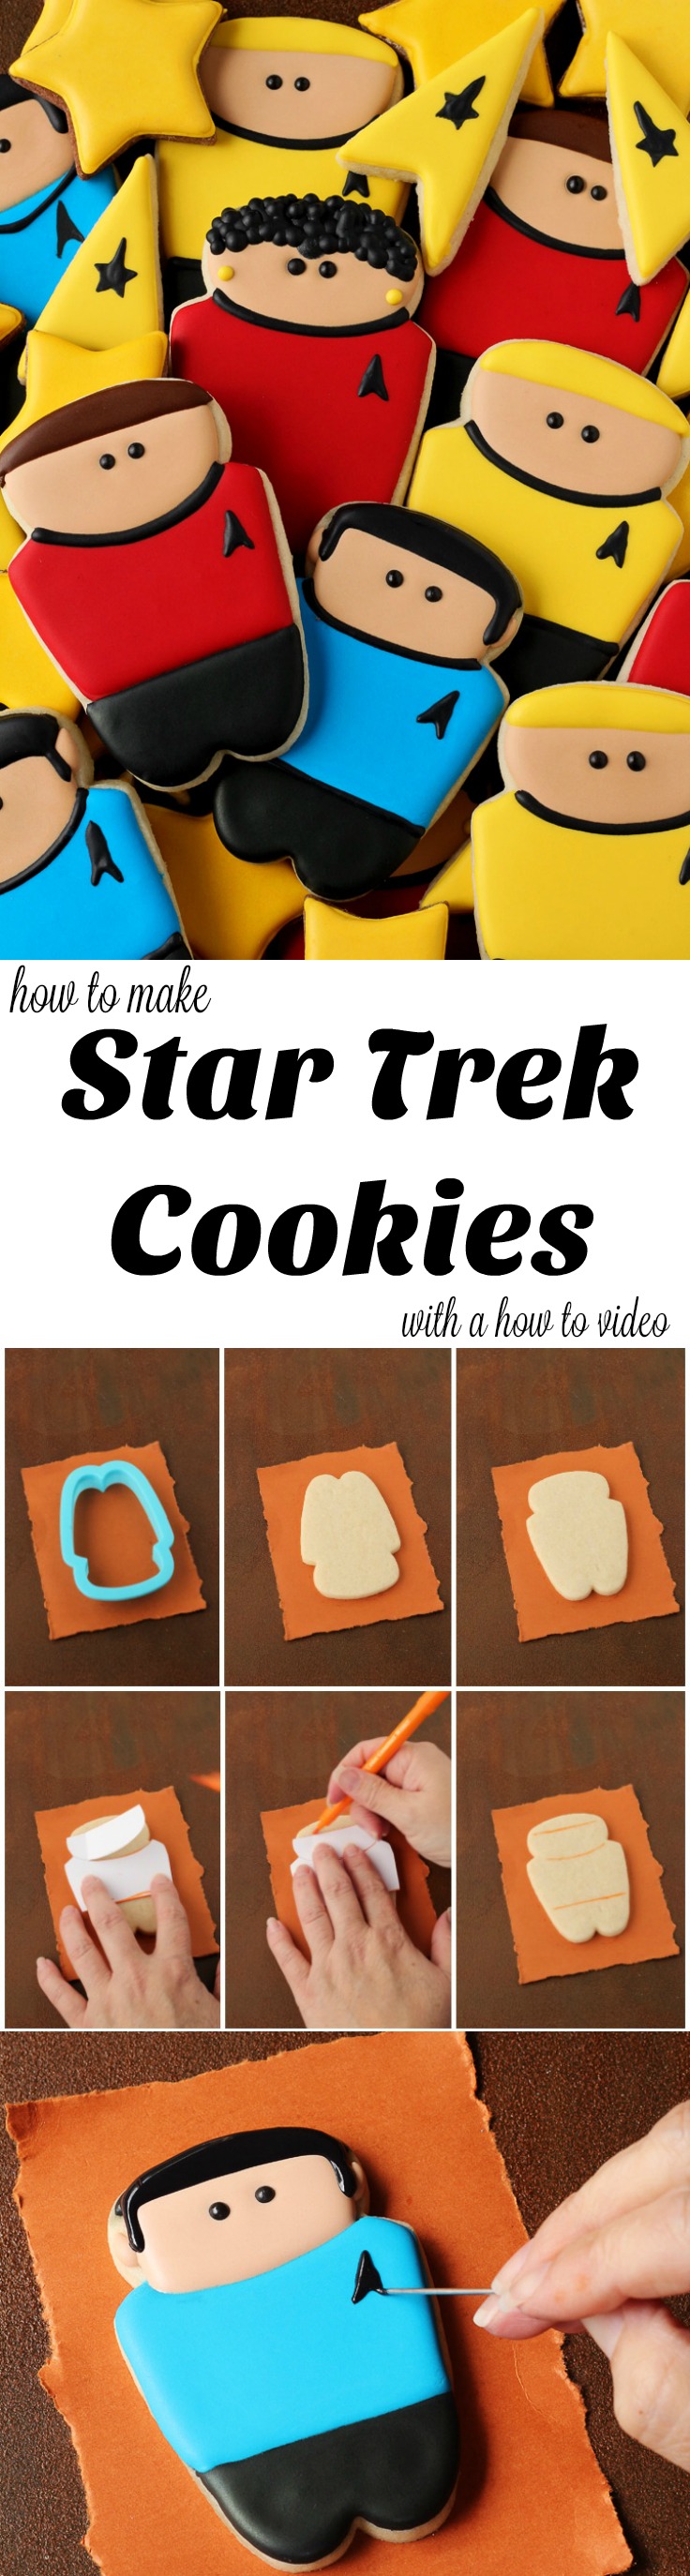 How to Make Star Trek Cookies with a How to Video Tutorial | The Bearfoot Baker